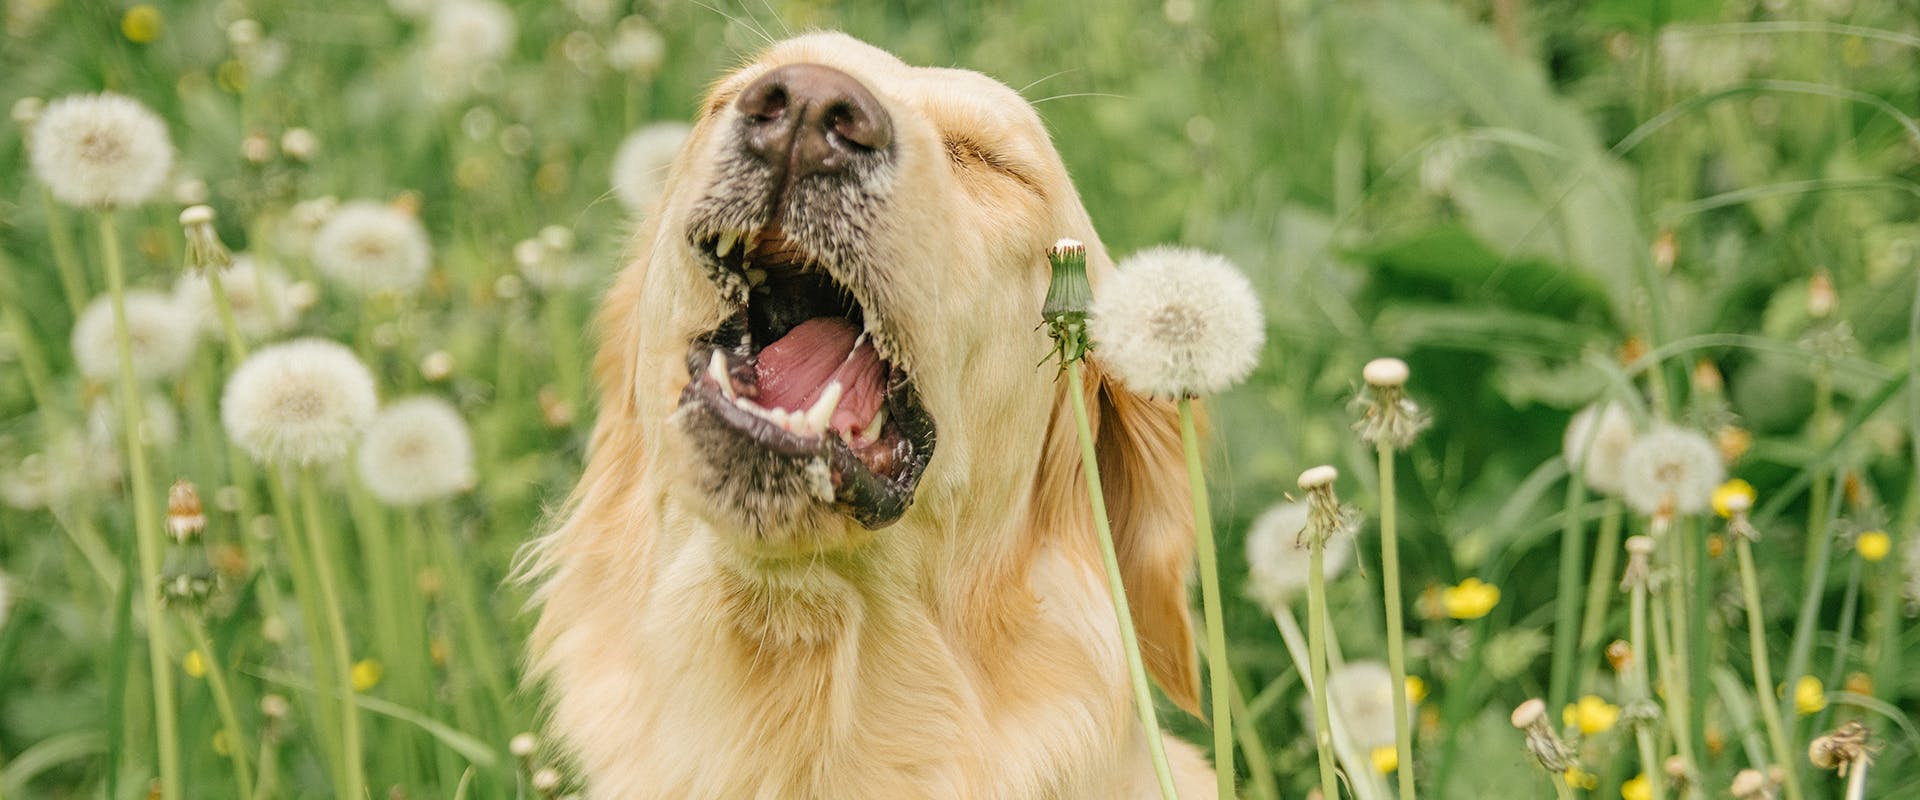 A dog sitting in long grass, sneezing